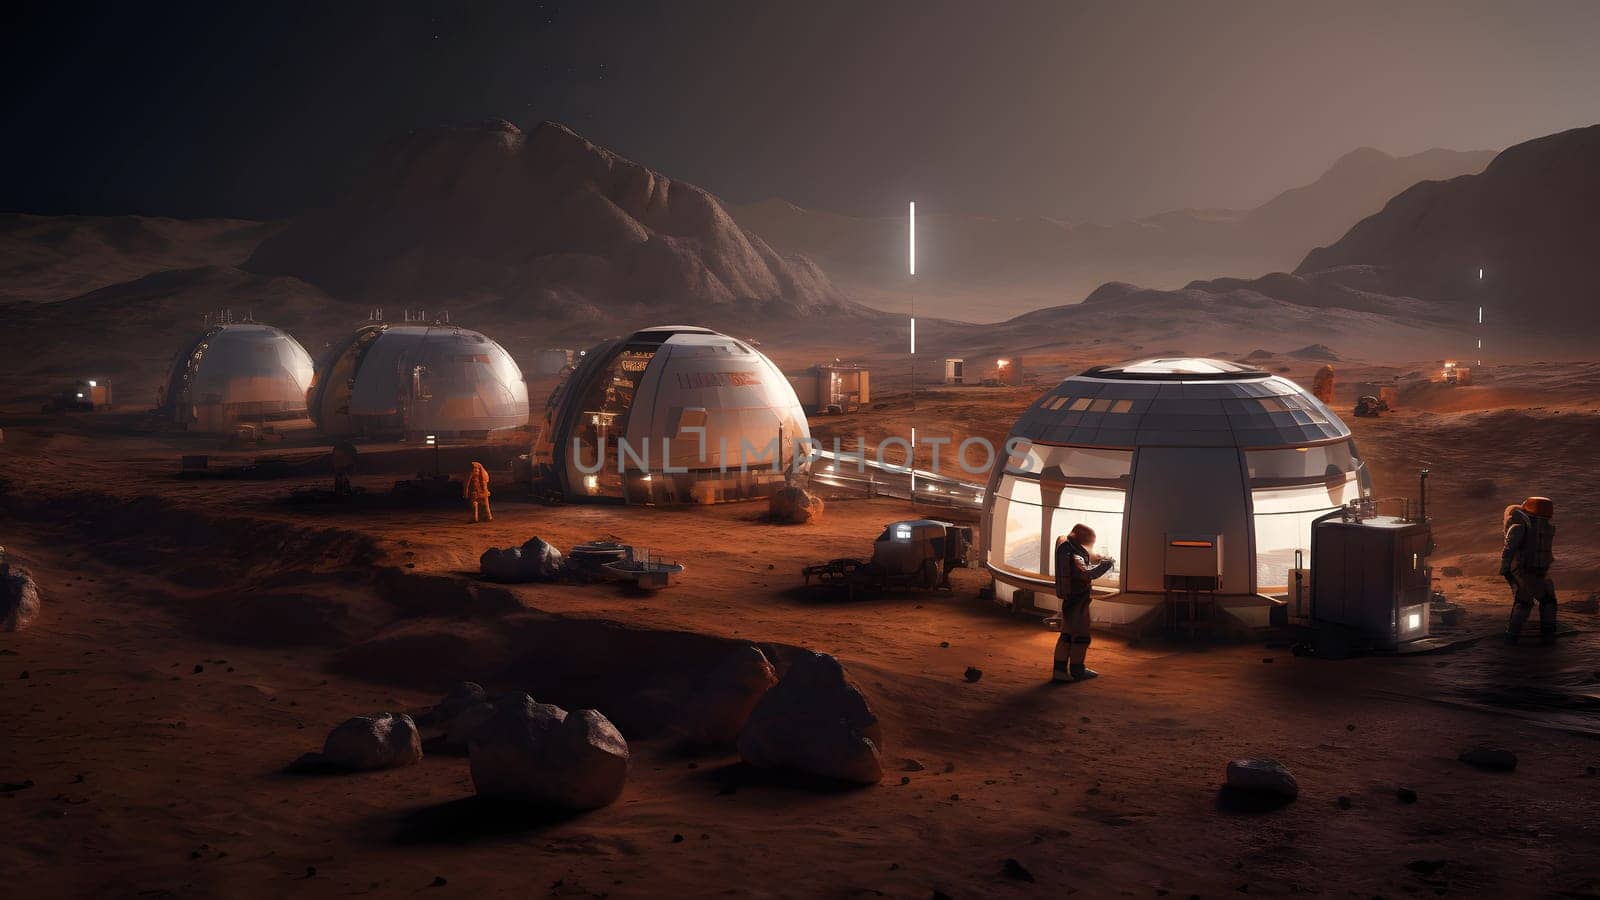 human colony on Mars. Neural network generated in May 2023. Not based on any actual person, scene or pattern.